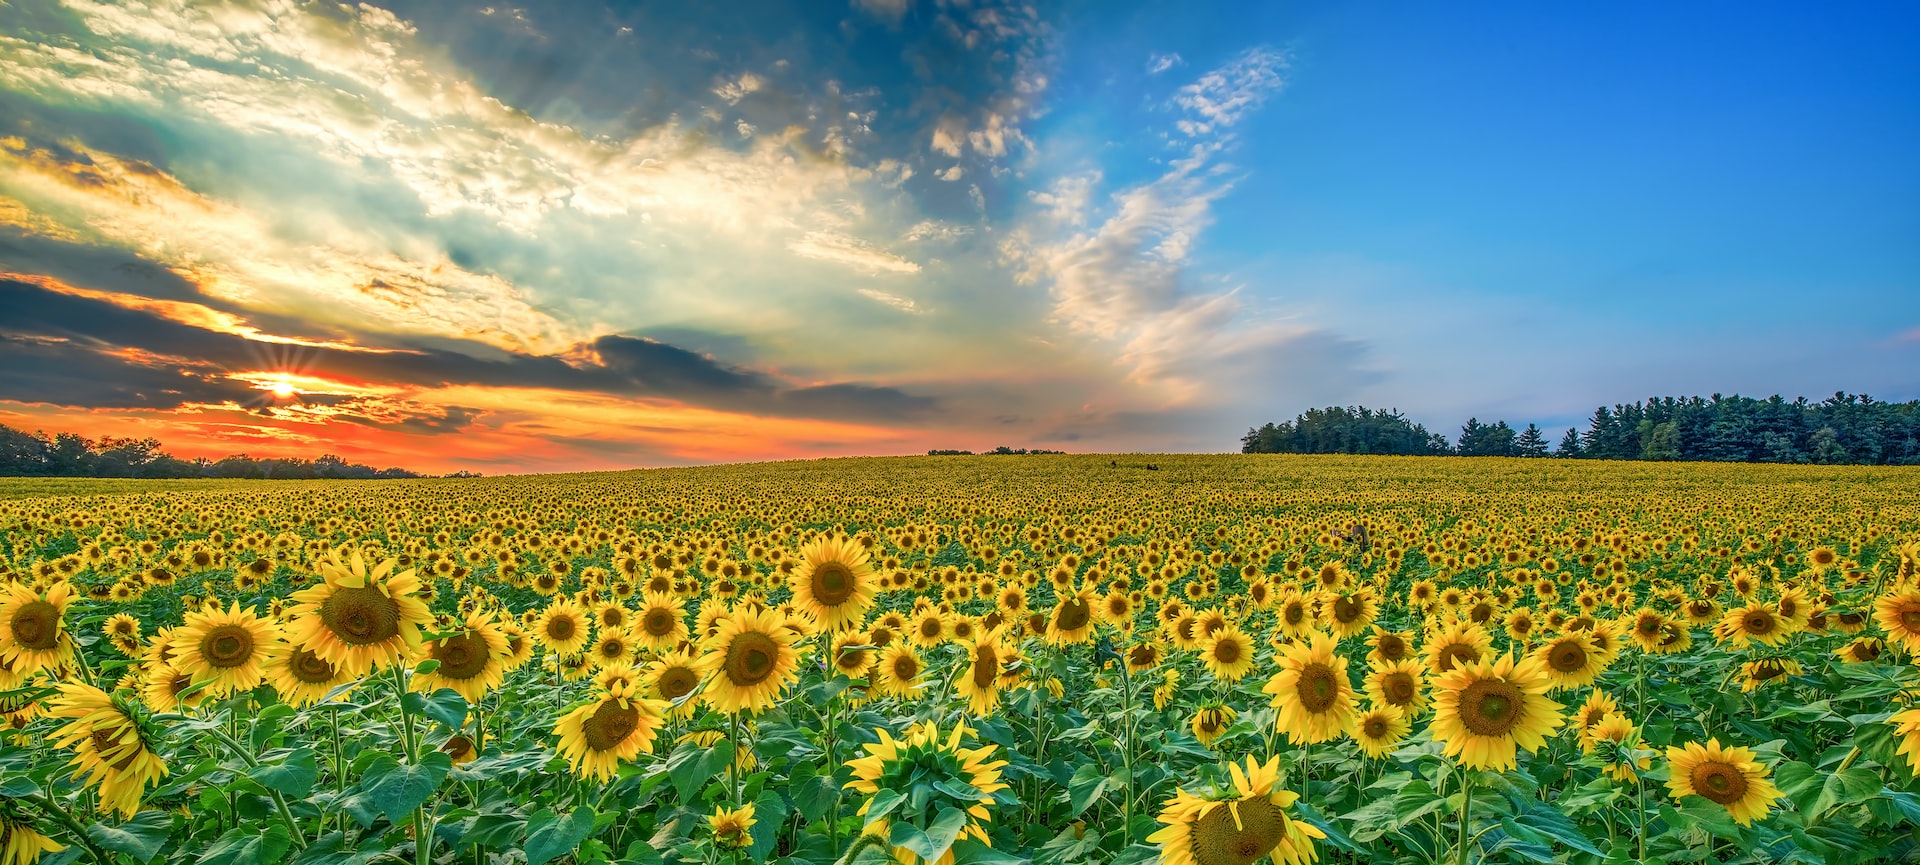 a meadow of sunflowers